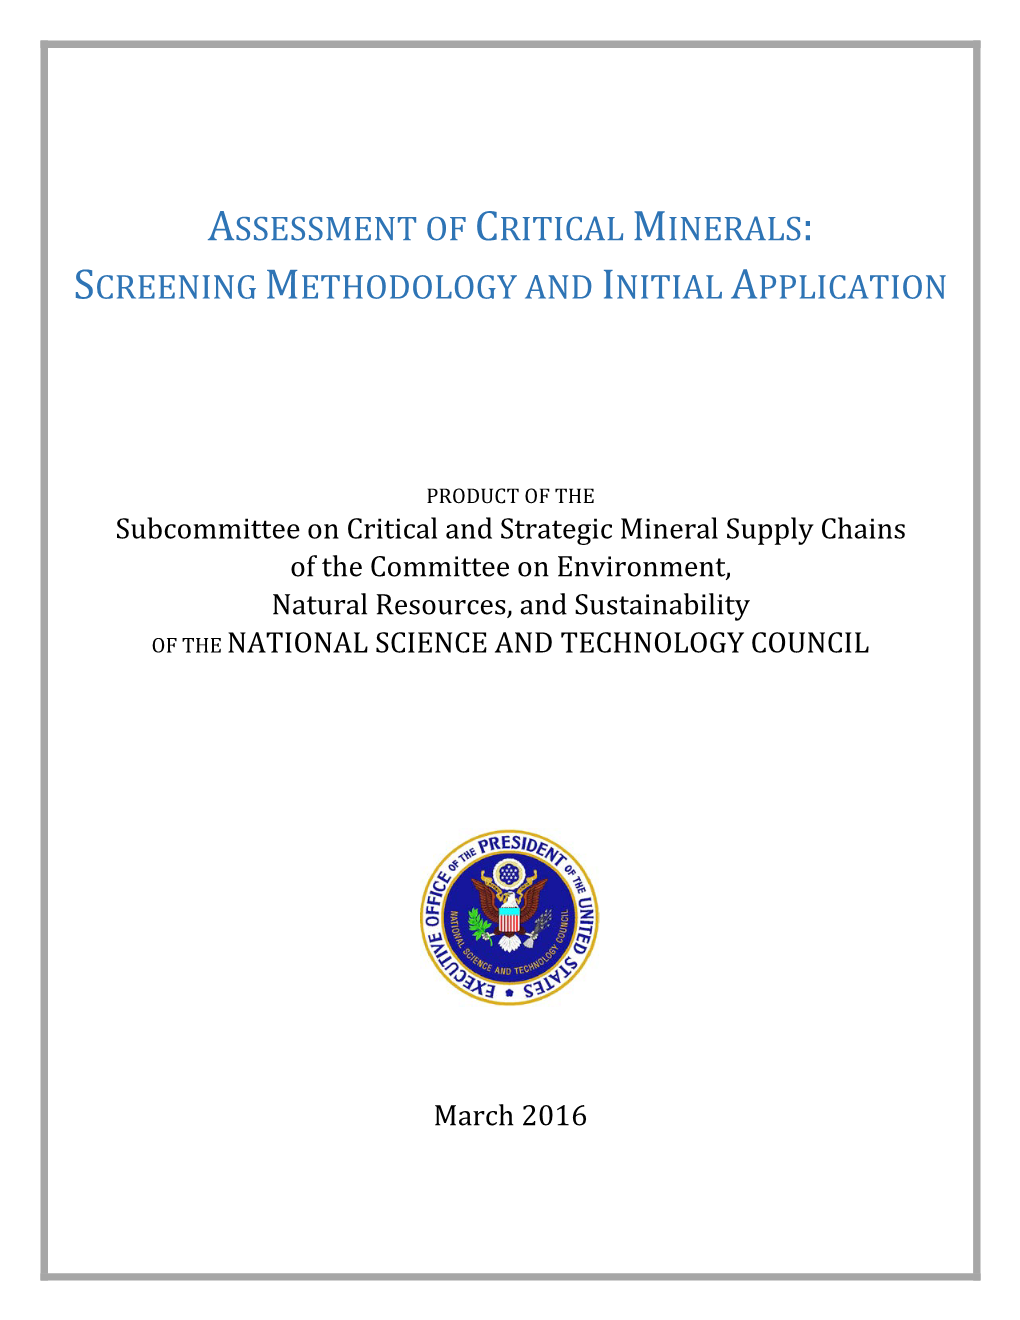 Assessment of Critical Minerals: Screening Methodology and Initial Application